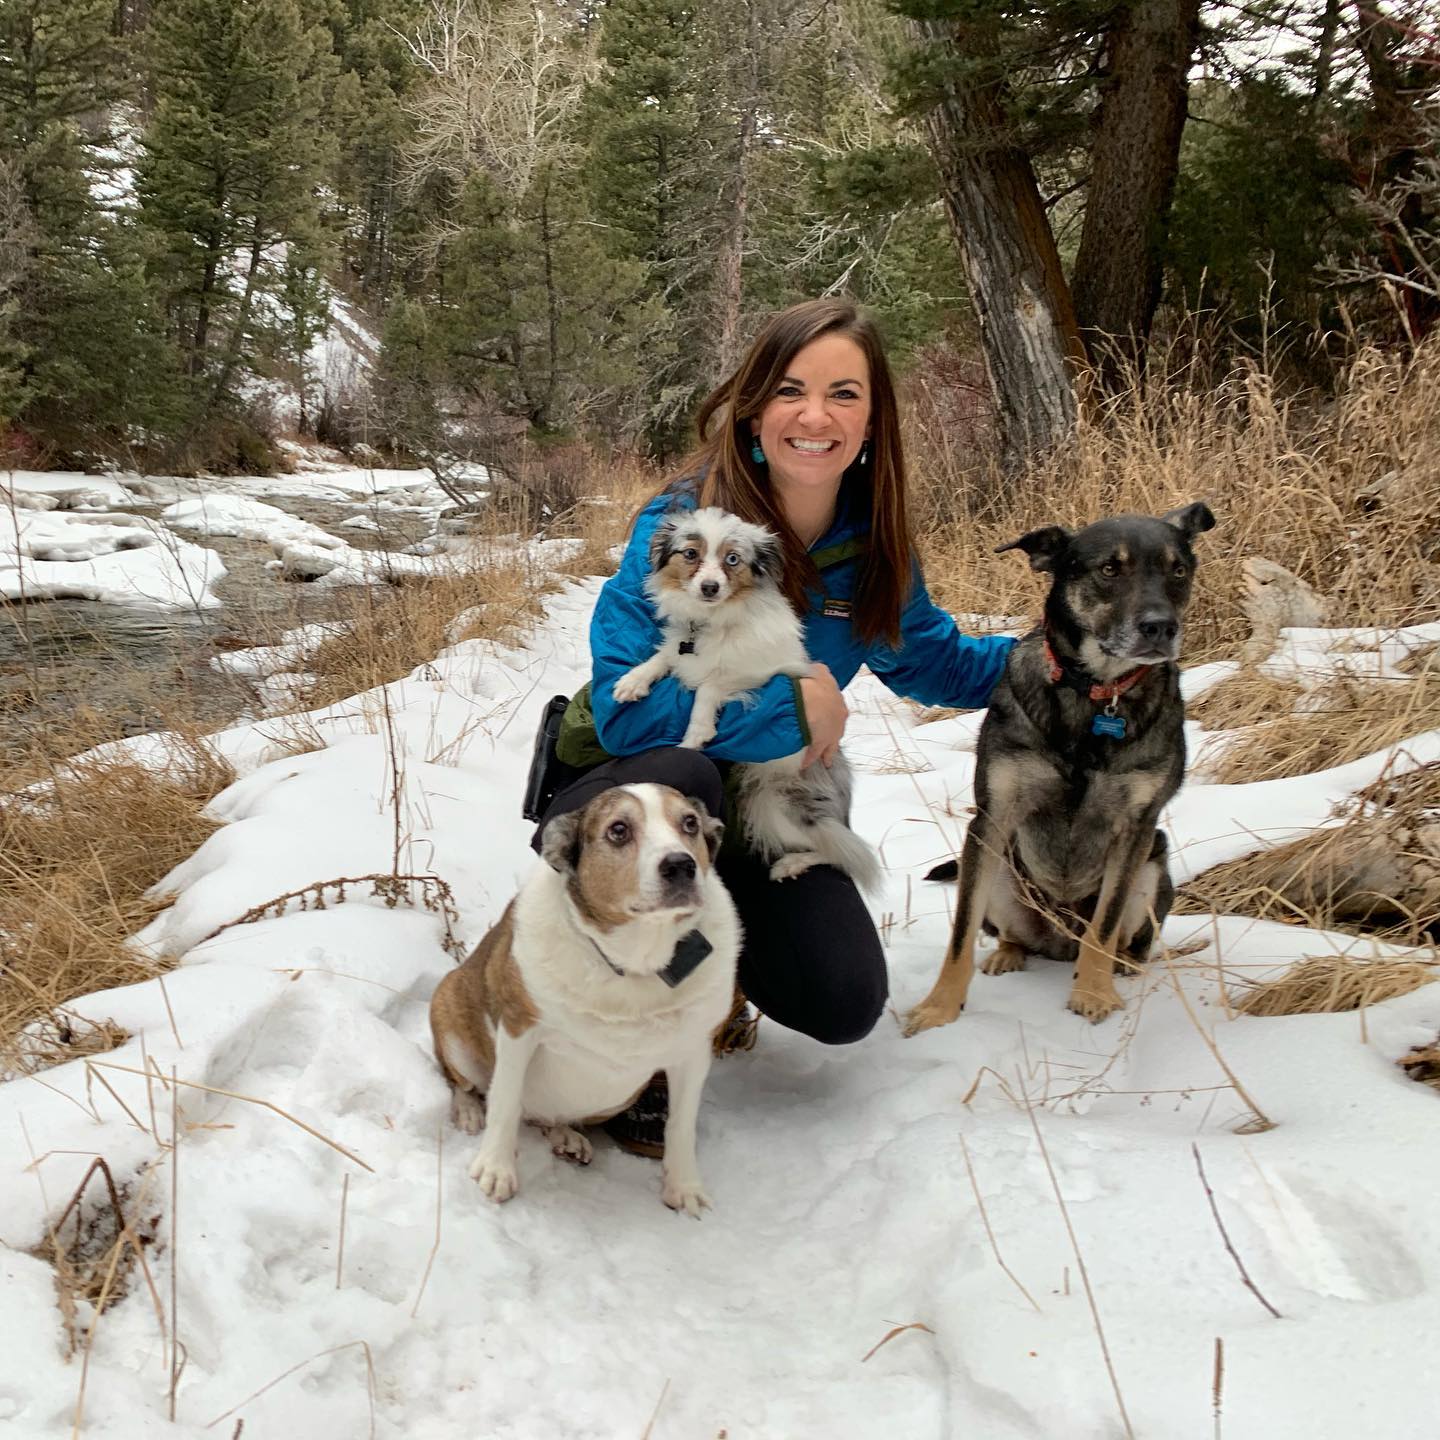 Rachel’s three dogs are frequent companions during hikes.